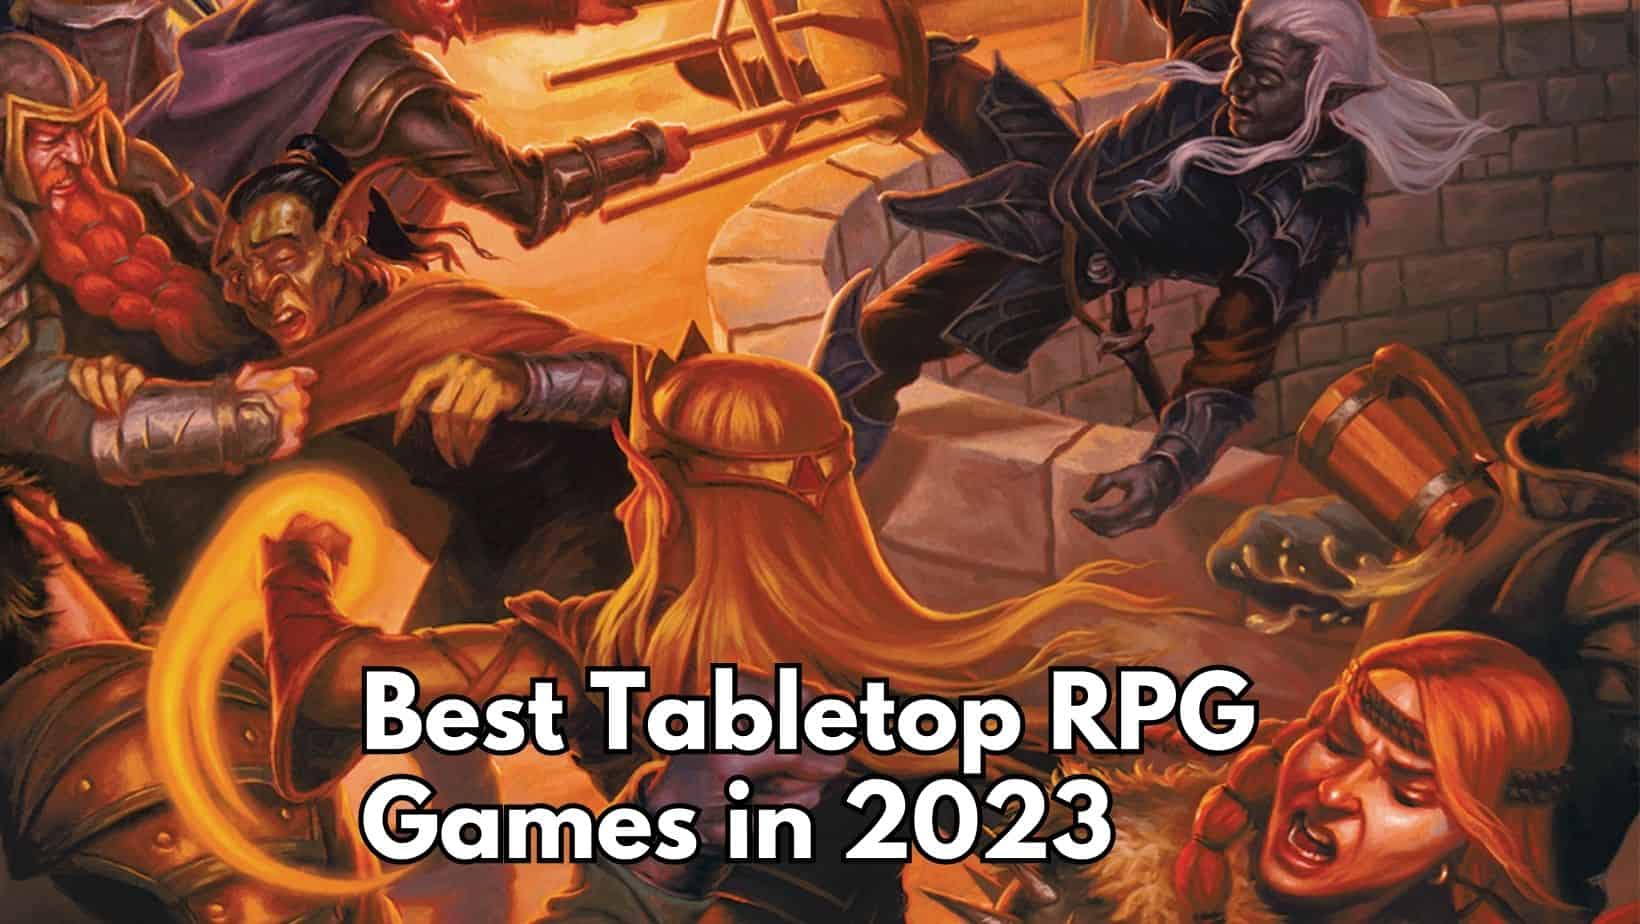 9 Best RPG Games for PS4 to Play in 2021 - LitRPG Reads